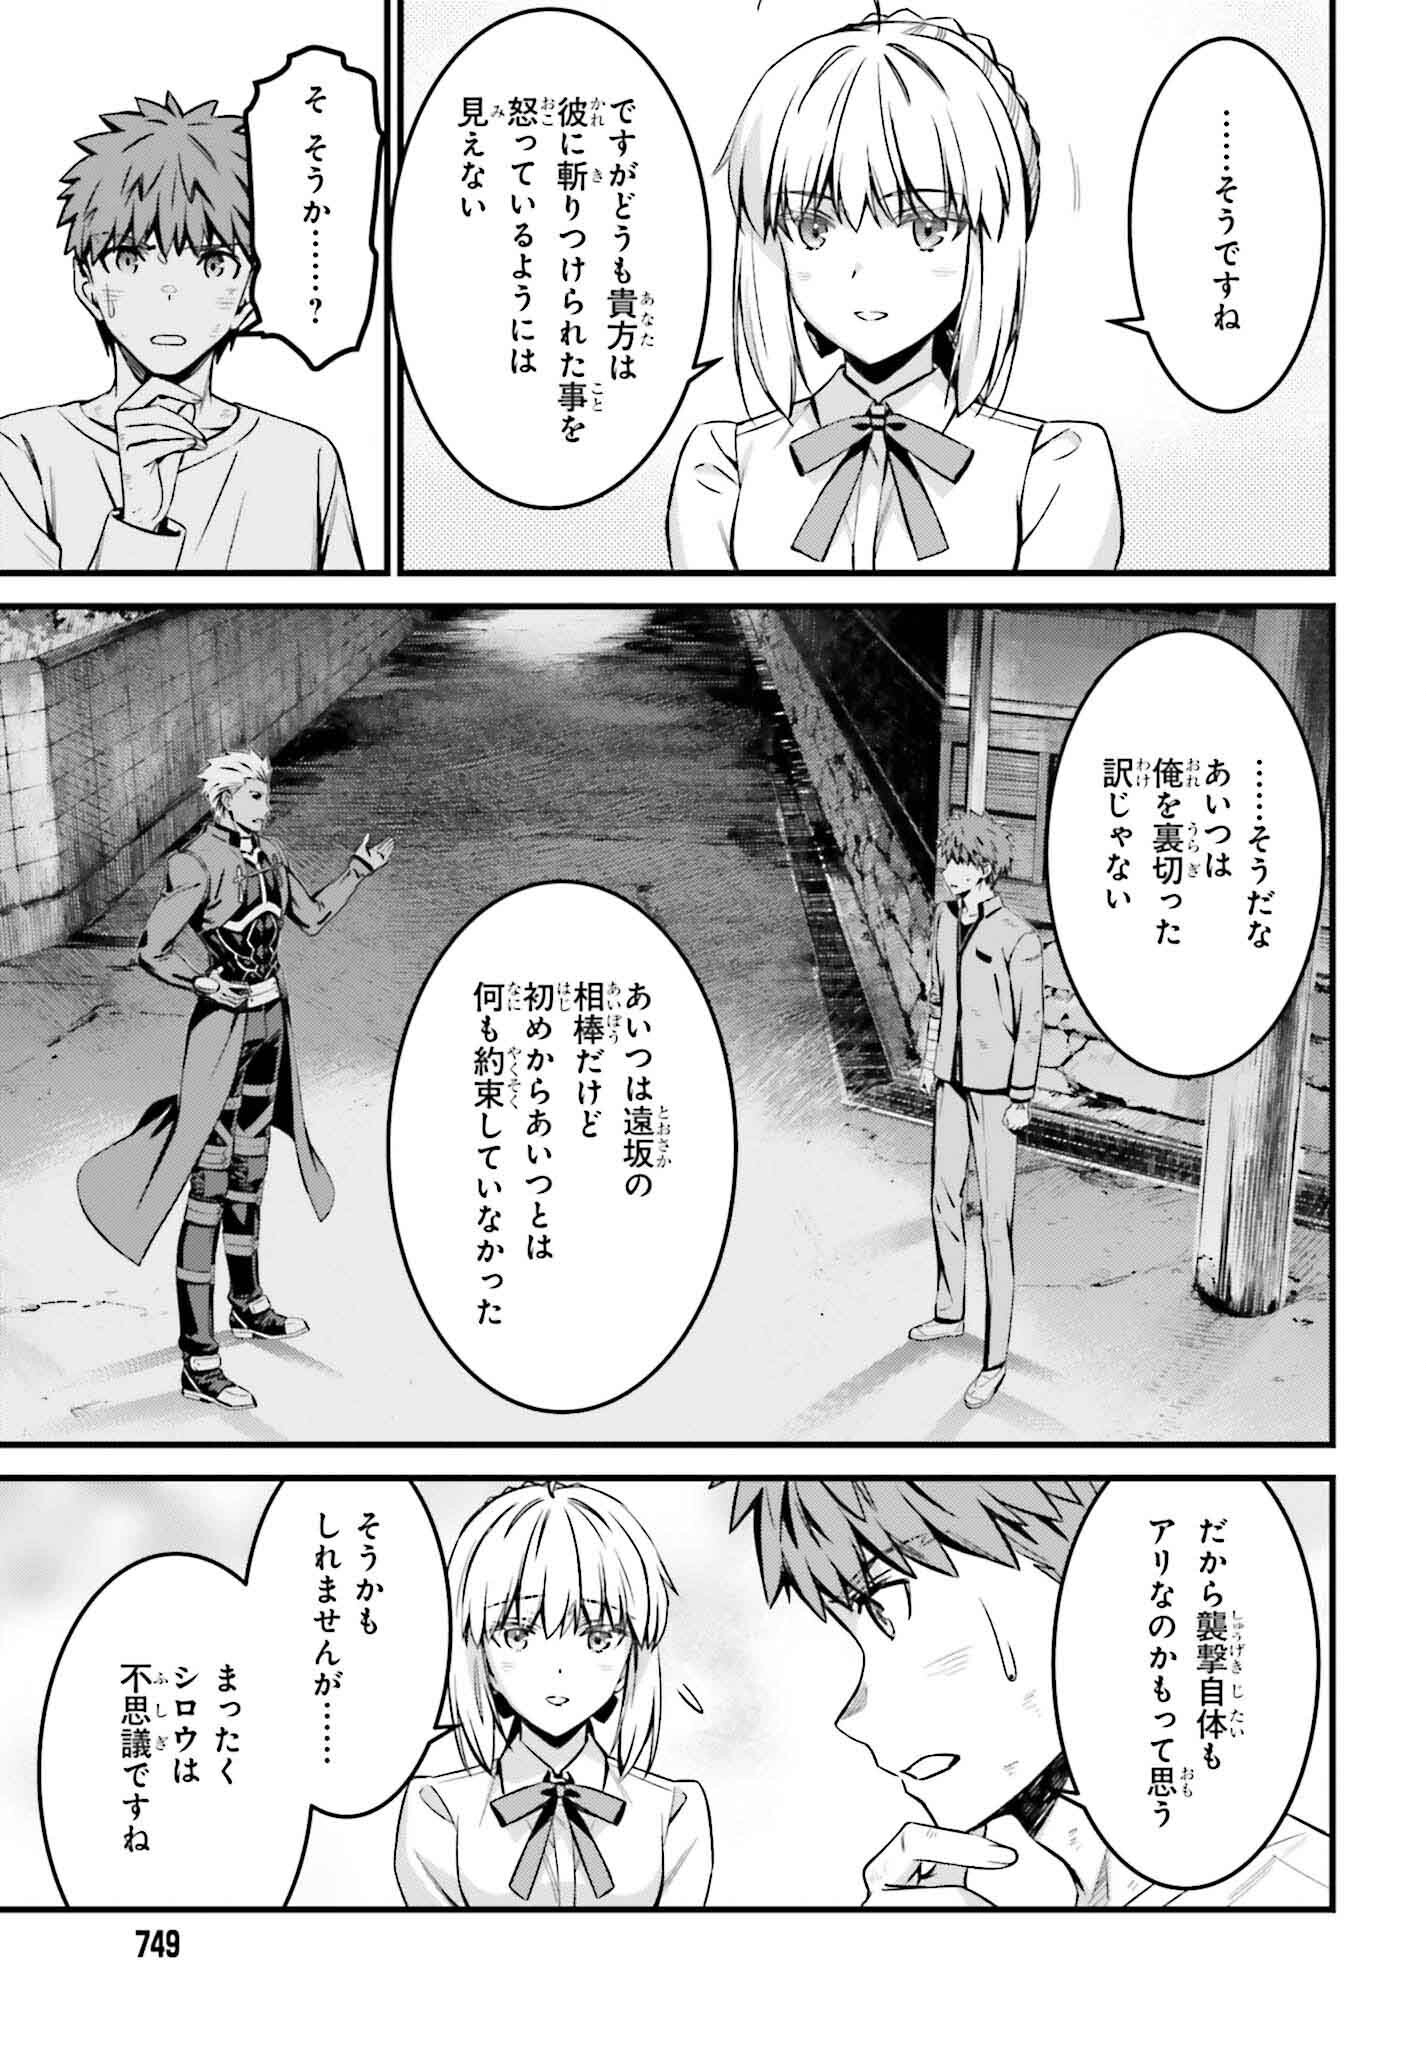 FATE/STAY NIGHT［UNLIMITED BLADE WORKS］ 第23話 - Page 4